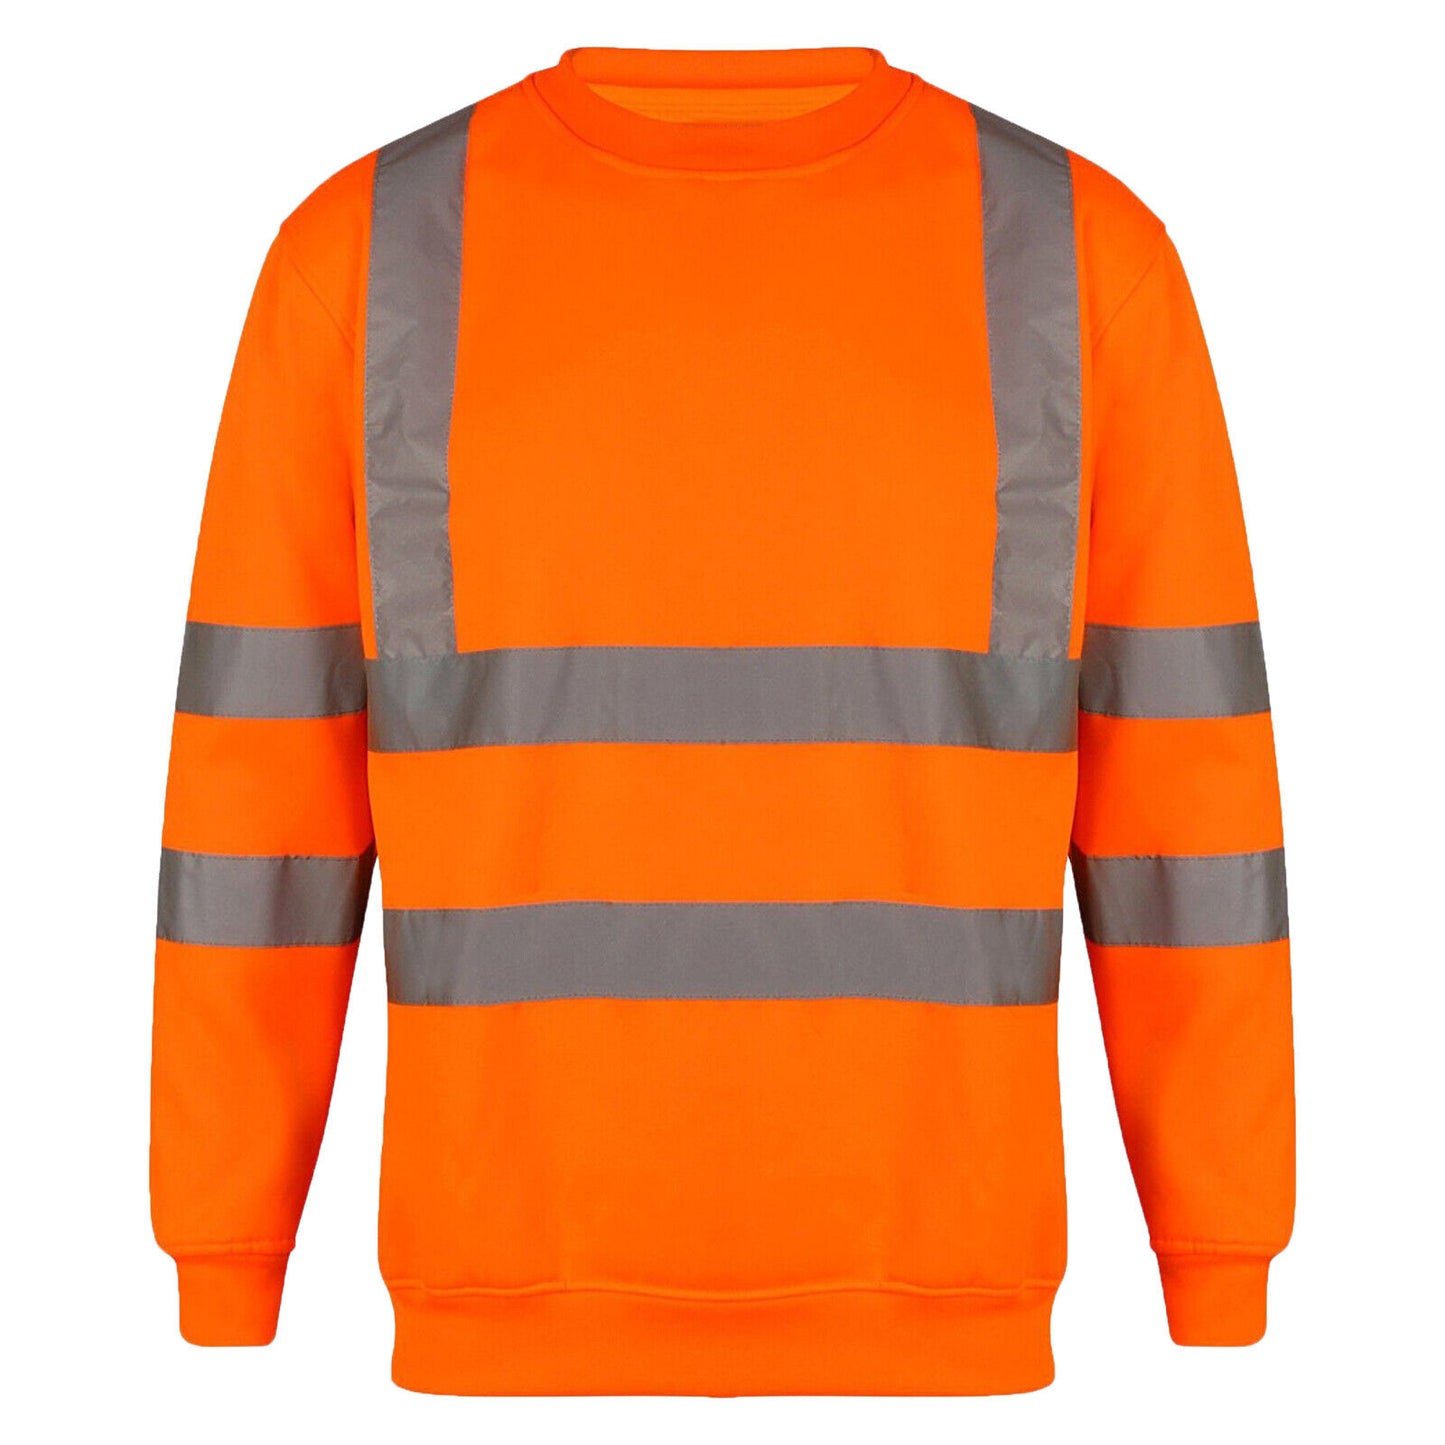 HI VIS CREW NECK SWEATSHIRTS HIGH VISIBILITY REFLECTIVE SECURRITY JUMPERS TOPS